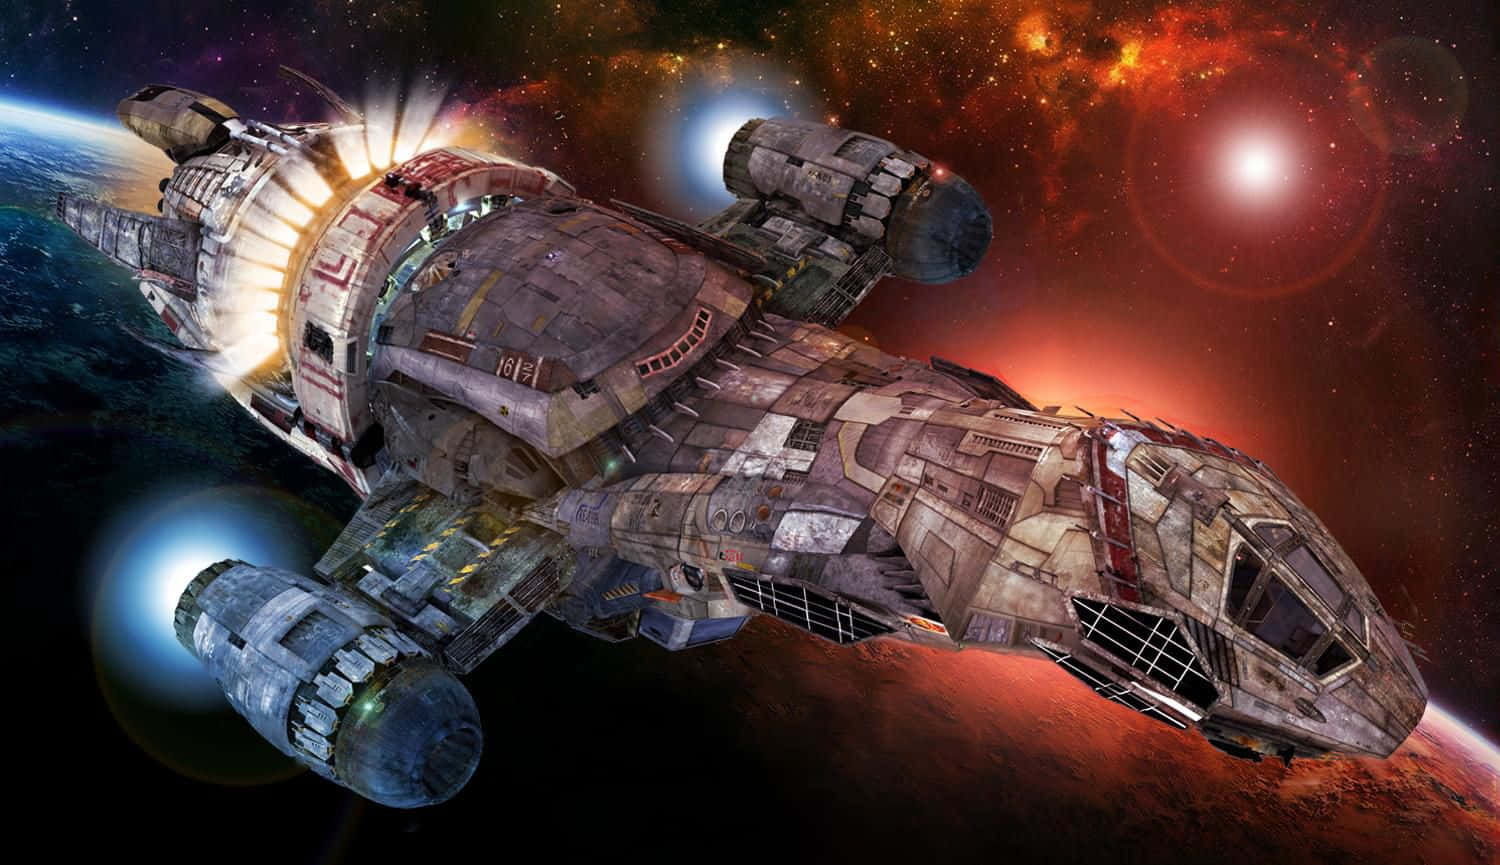 TV Show Firefly The Serenity Spacecraft Wallpaper